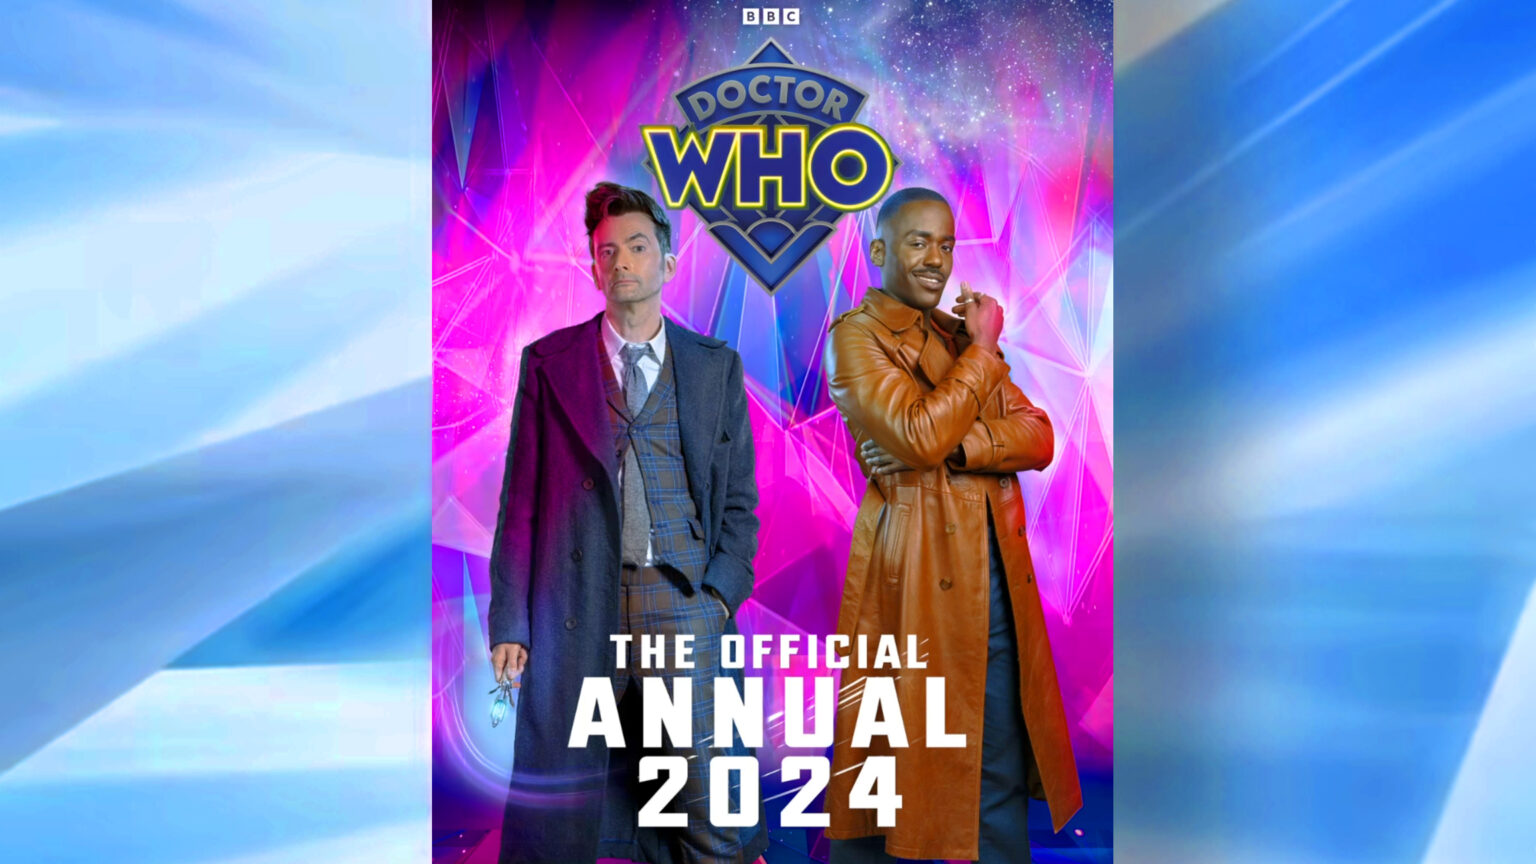 2024 Doctor Who Annual 1536x864 